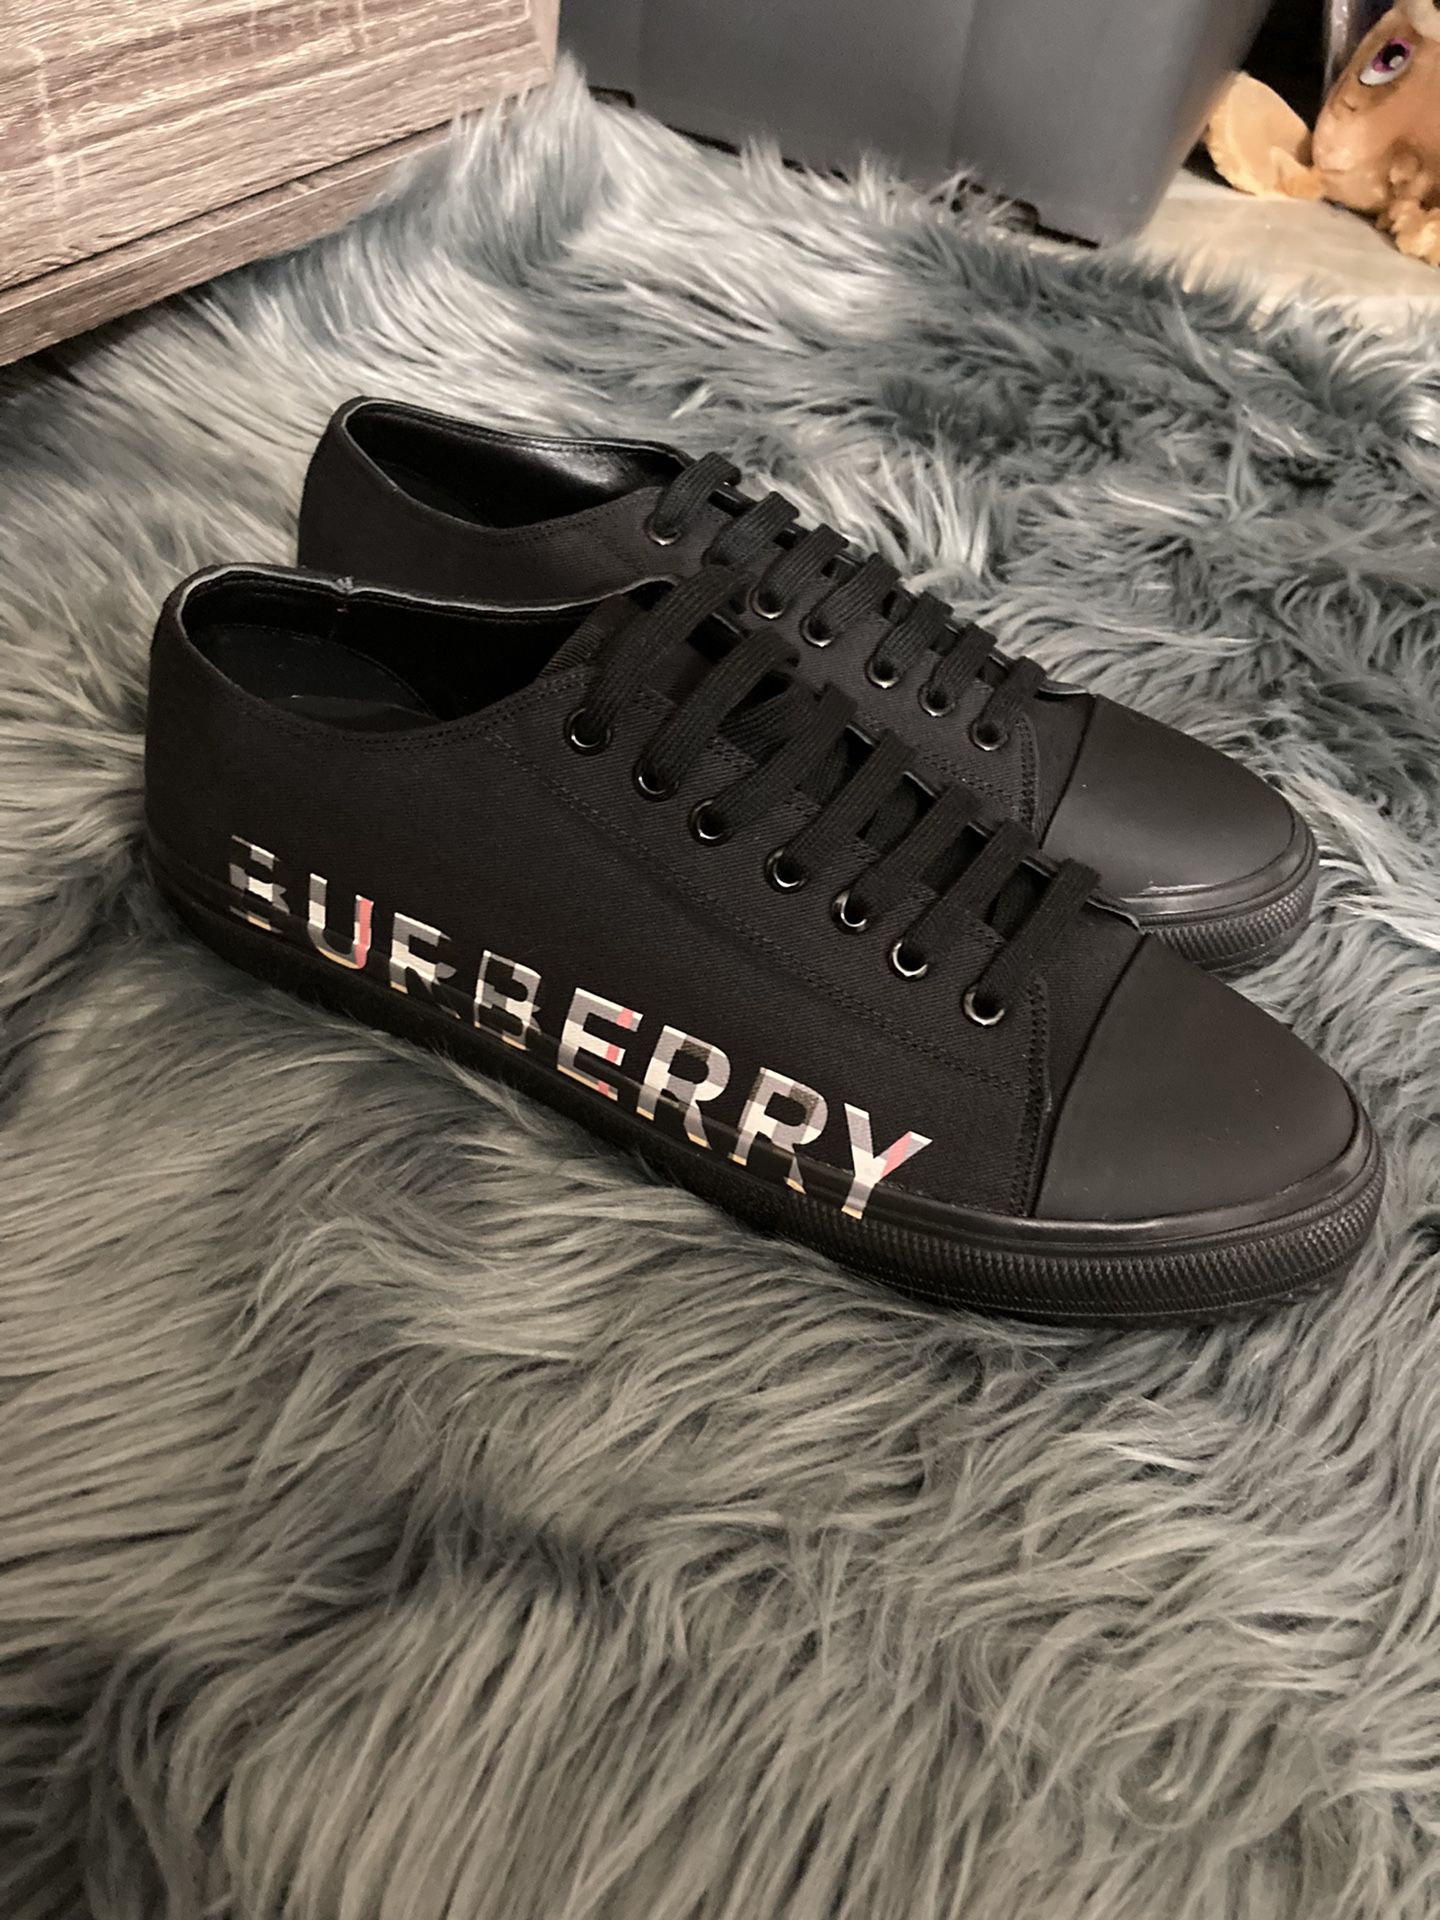 Burberry Woman’s Size 8